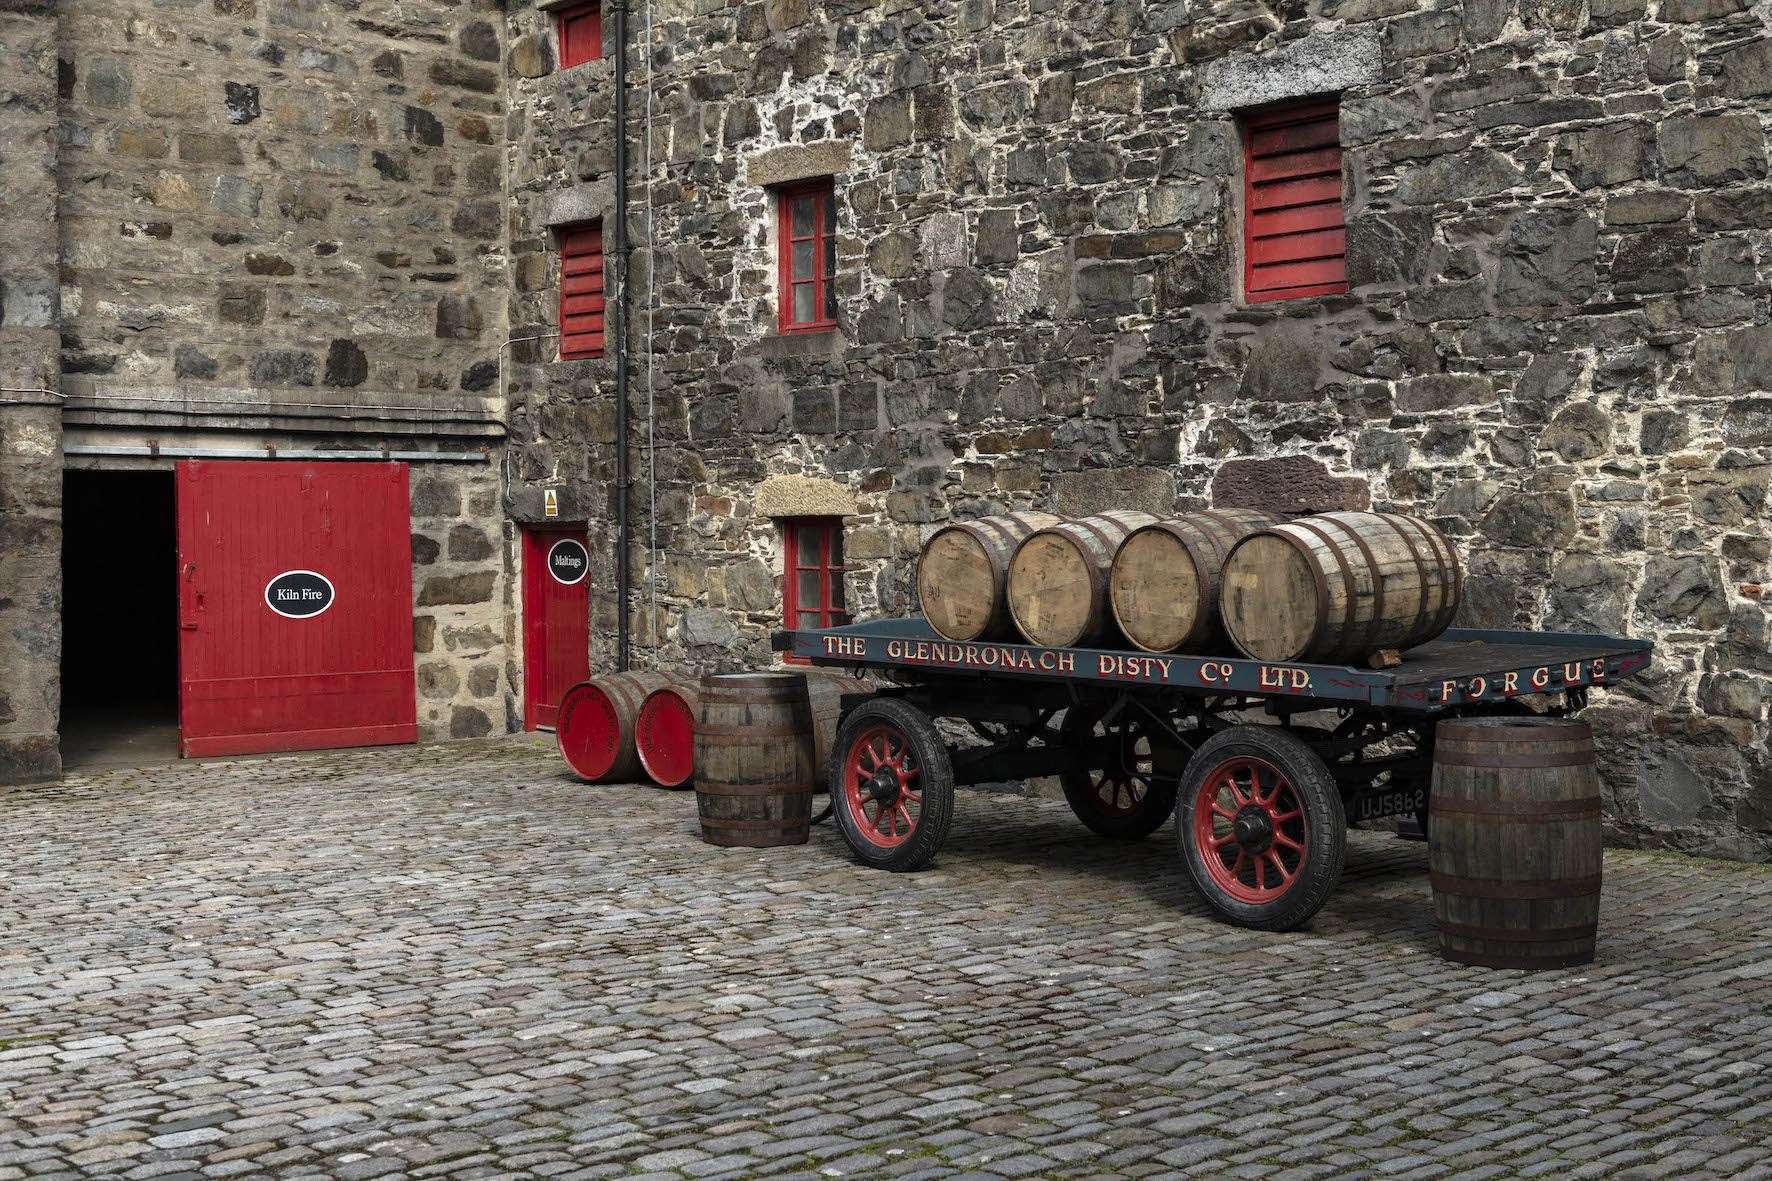 GlenDronach's cask will go up for auction in France in October,.